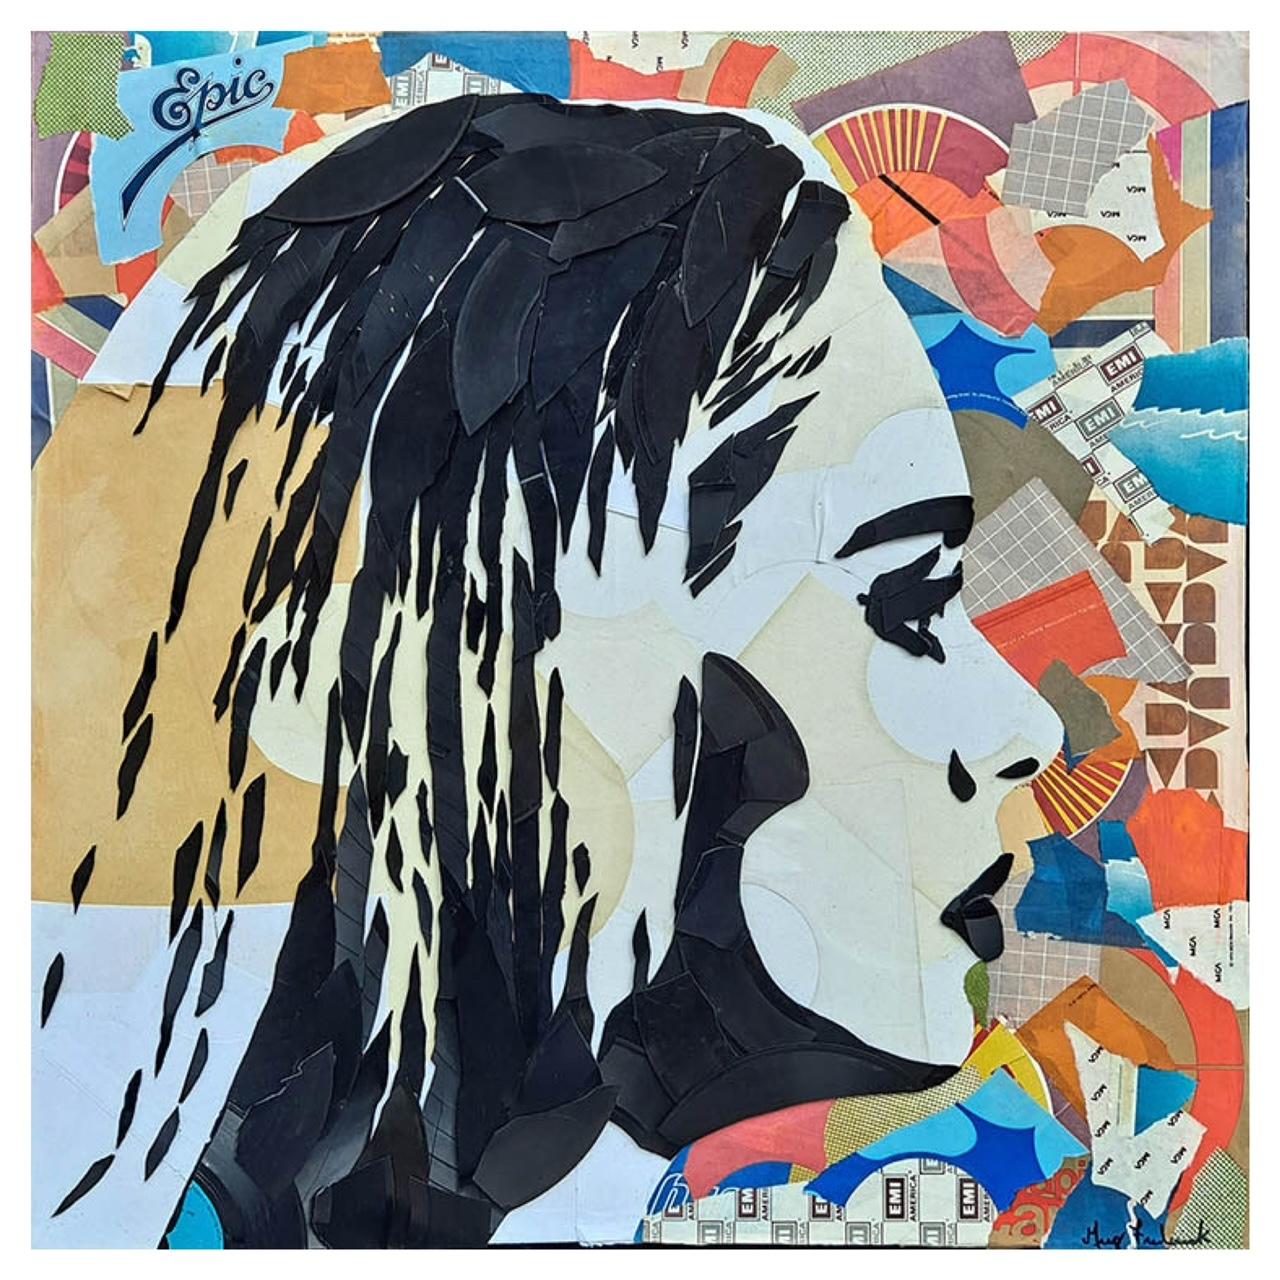 Adele Canvas by Greg Frederick, 2022